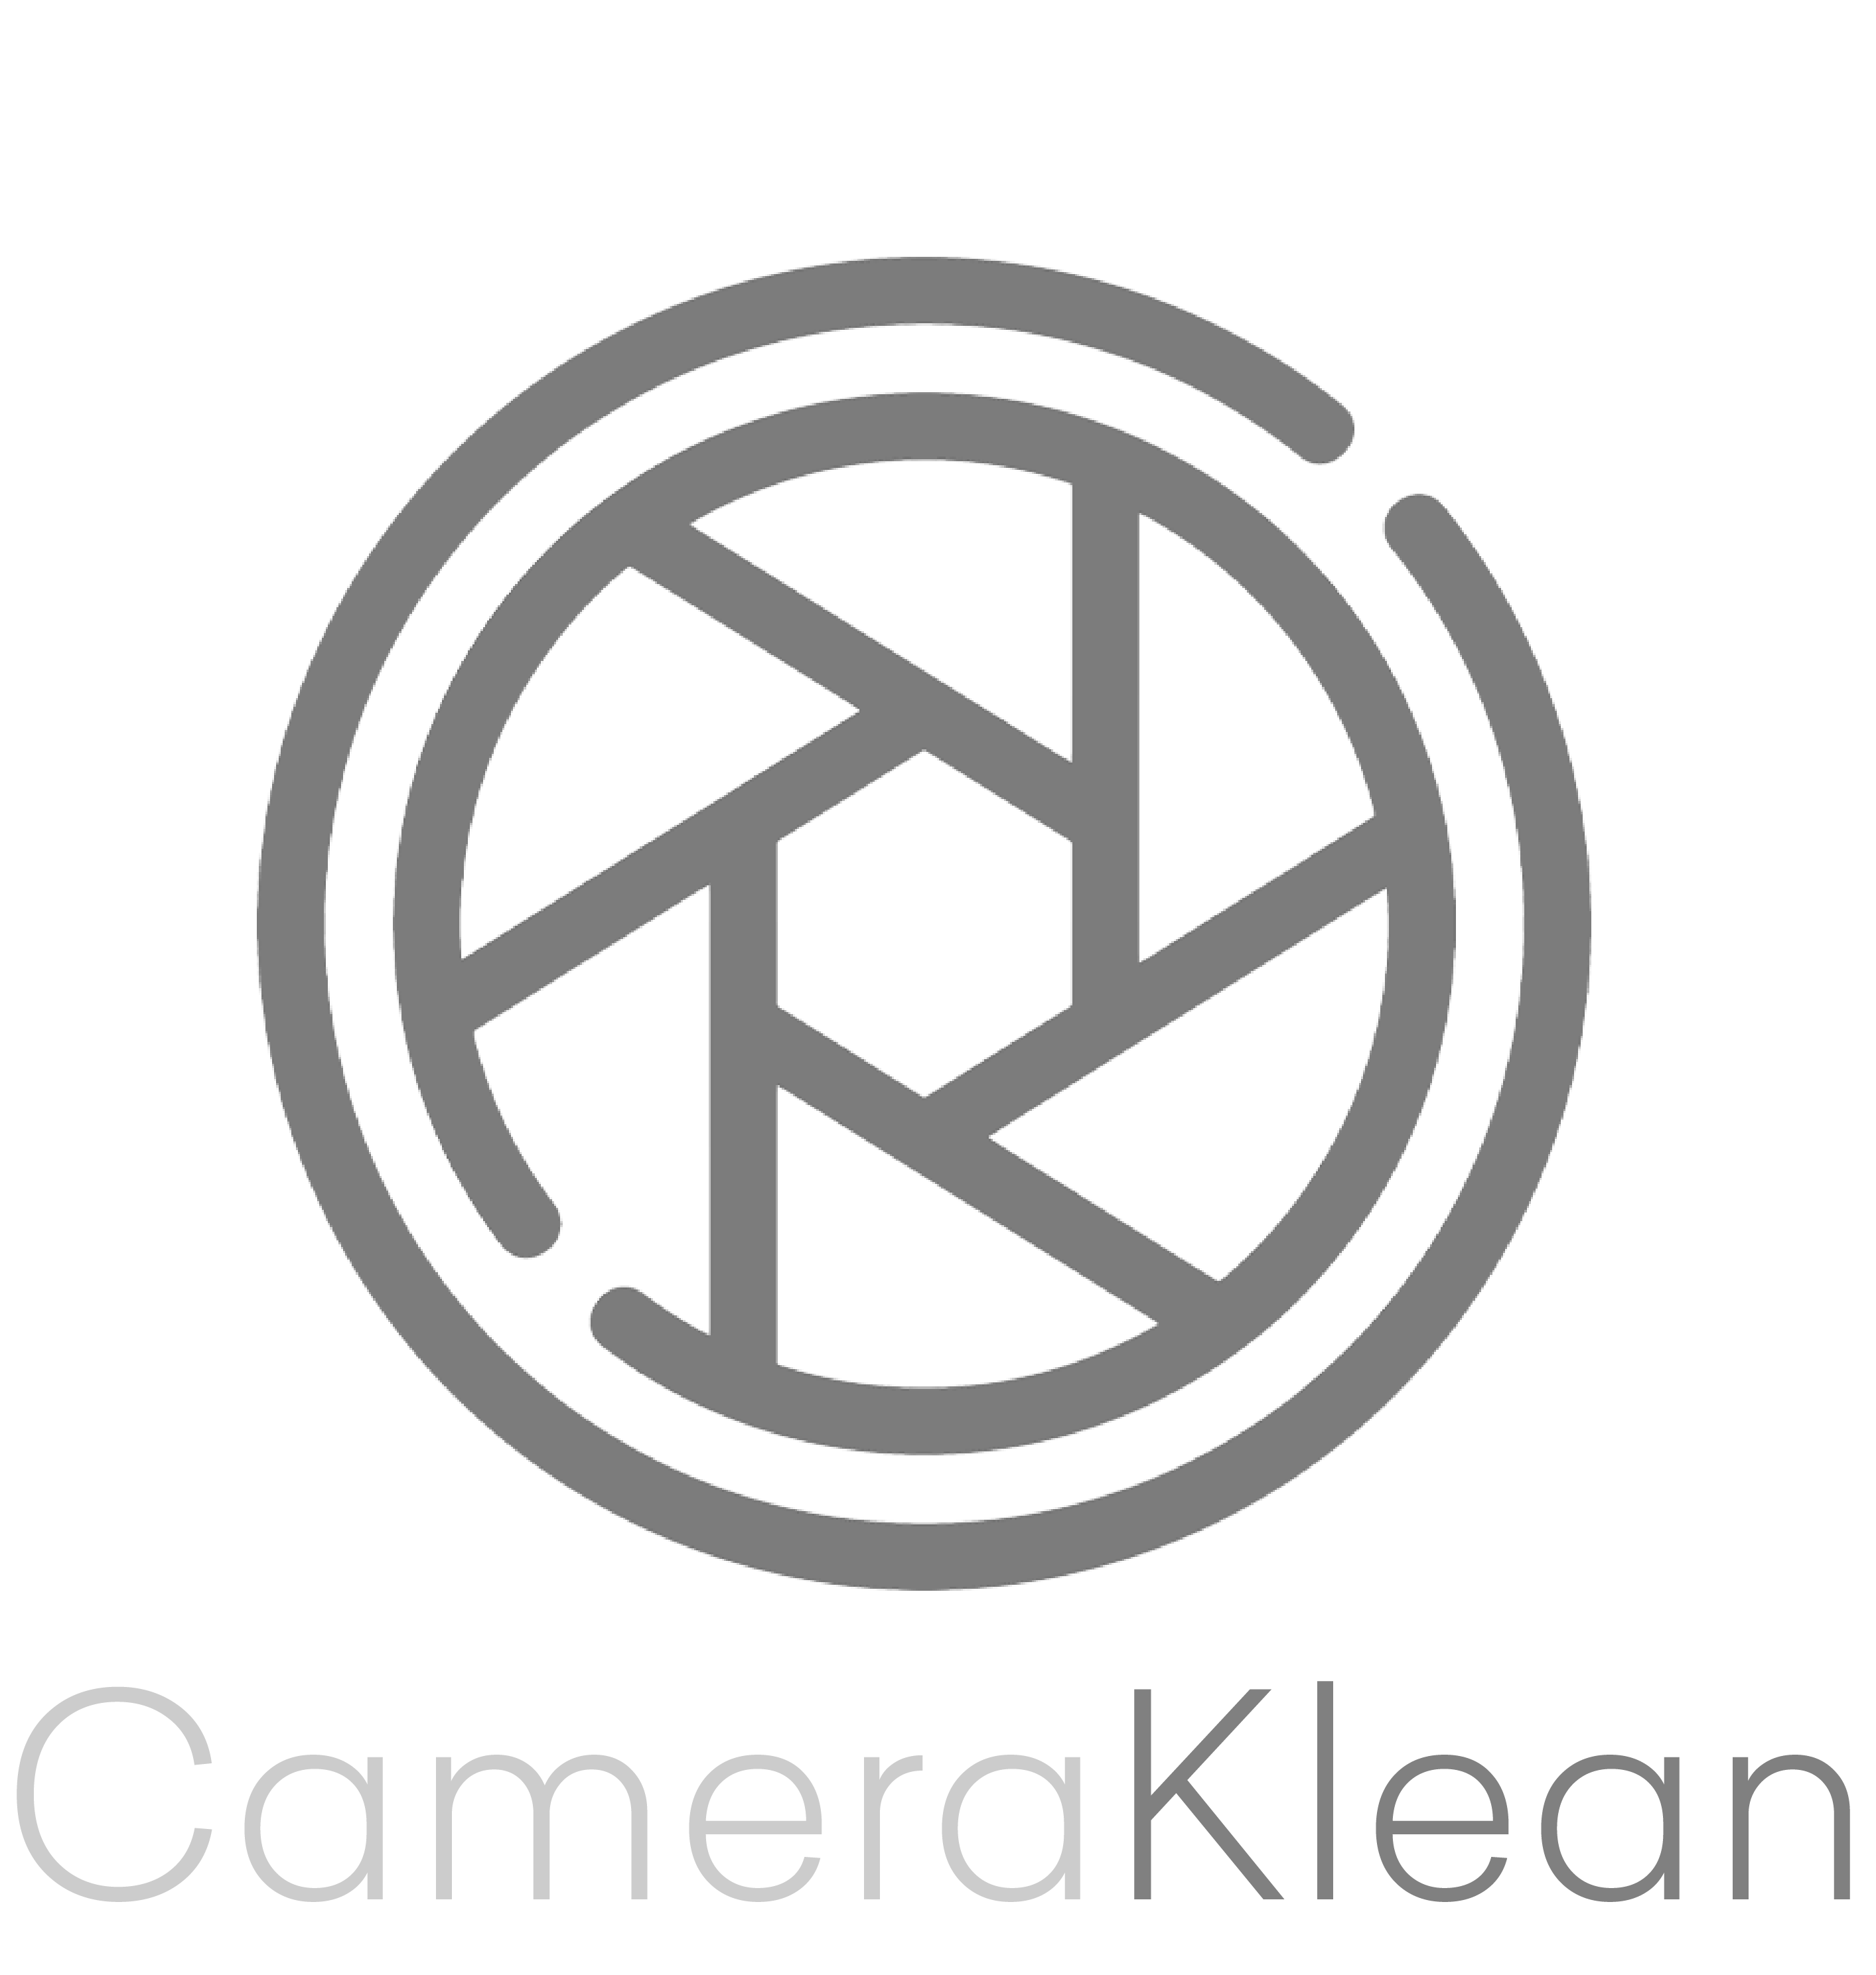 what-size-is-your-camera-s-sensor-cameraklean